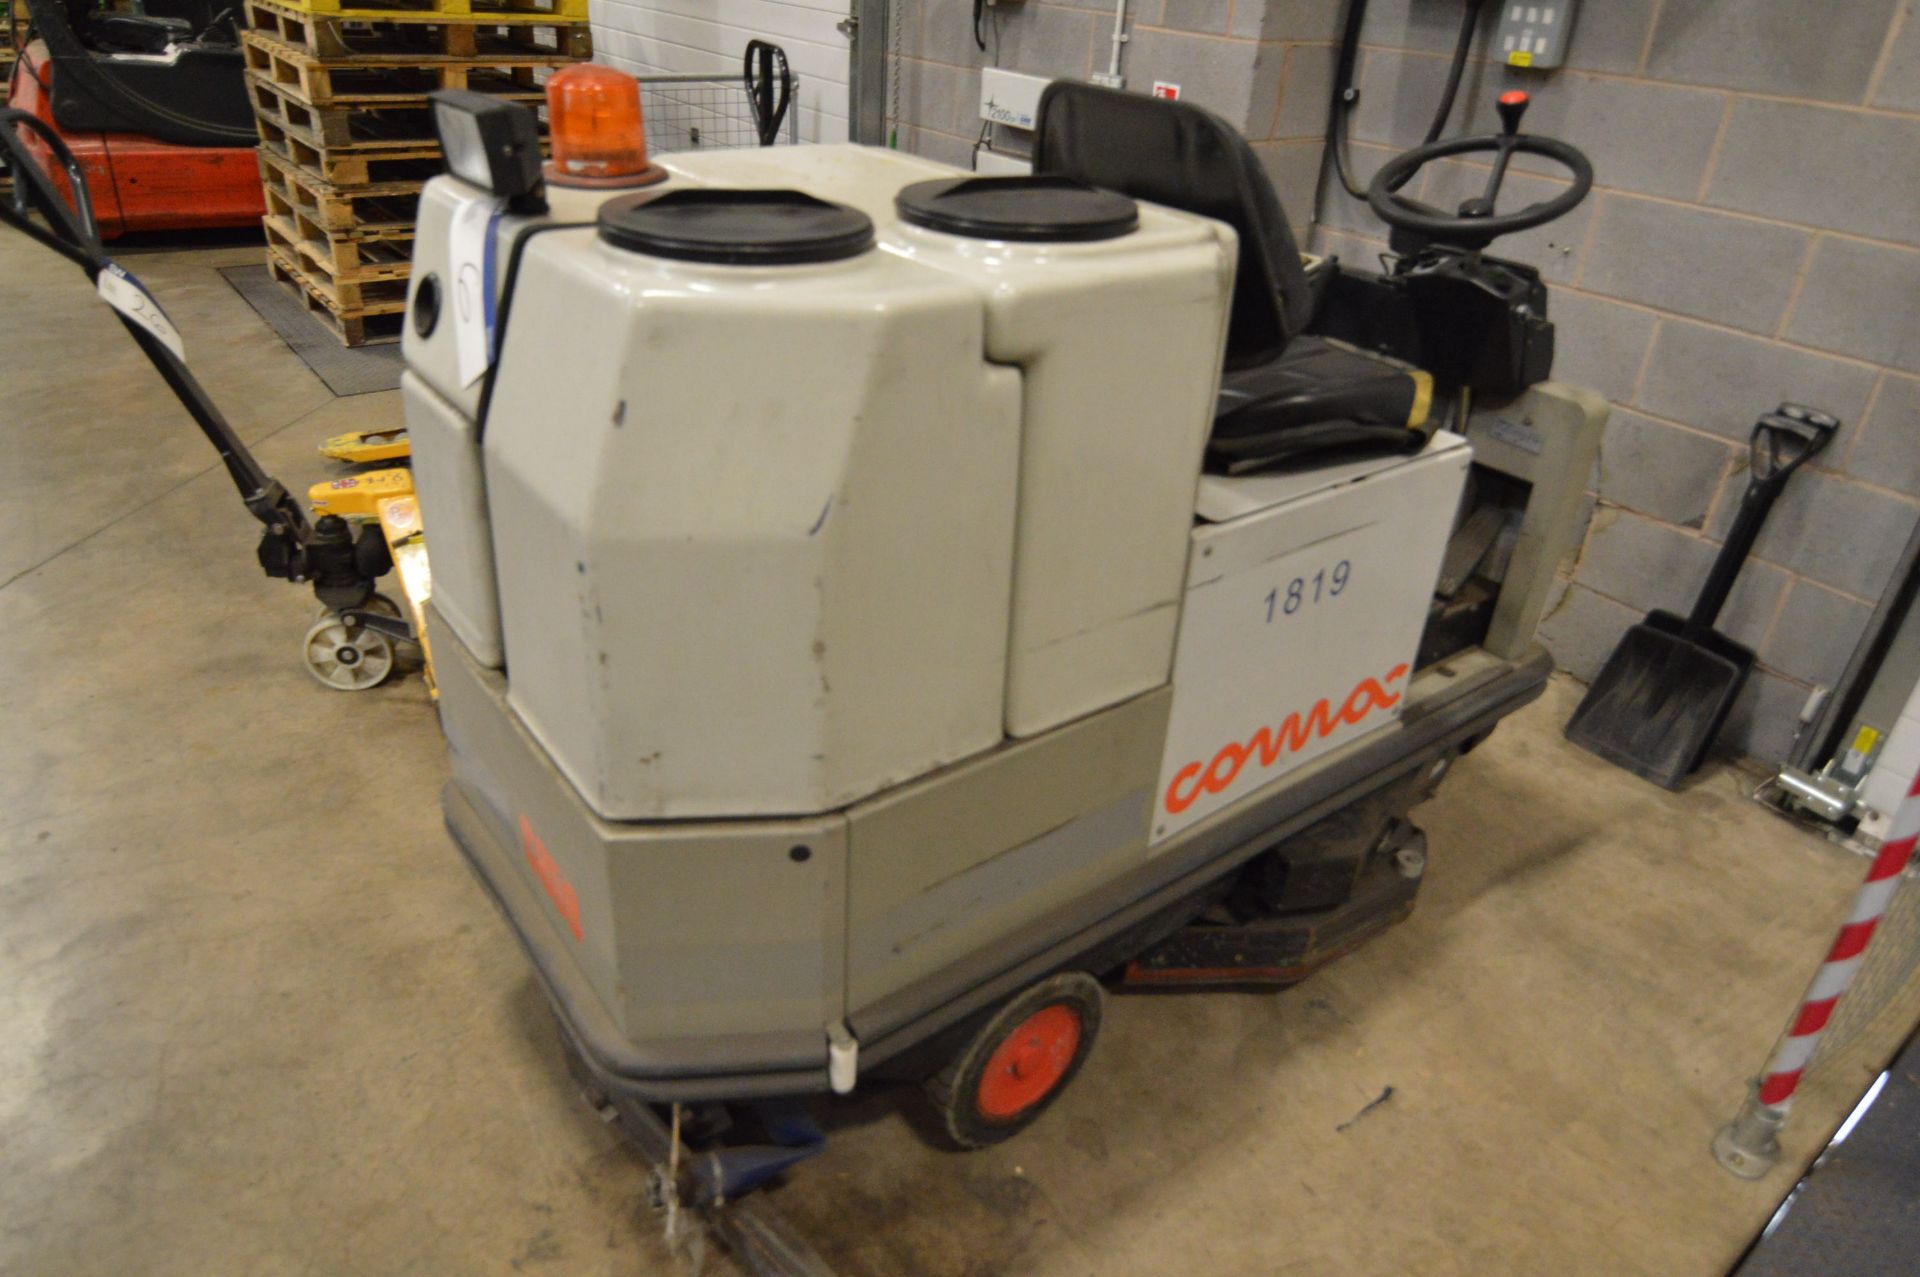 Comac C85B RIDE-ON-FLOOR CLEANING MACHINE, serial - Image 4 of 5